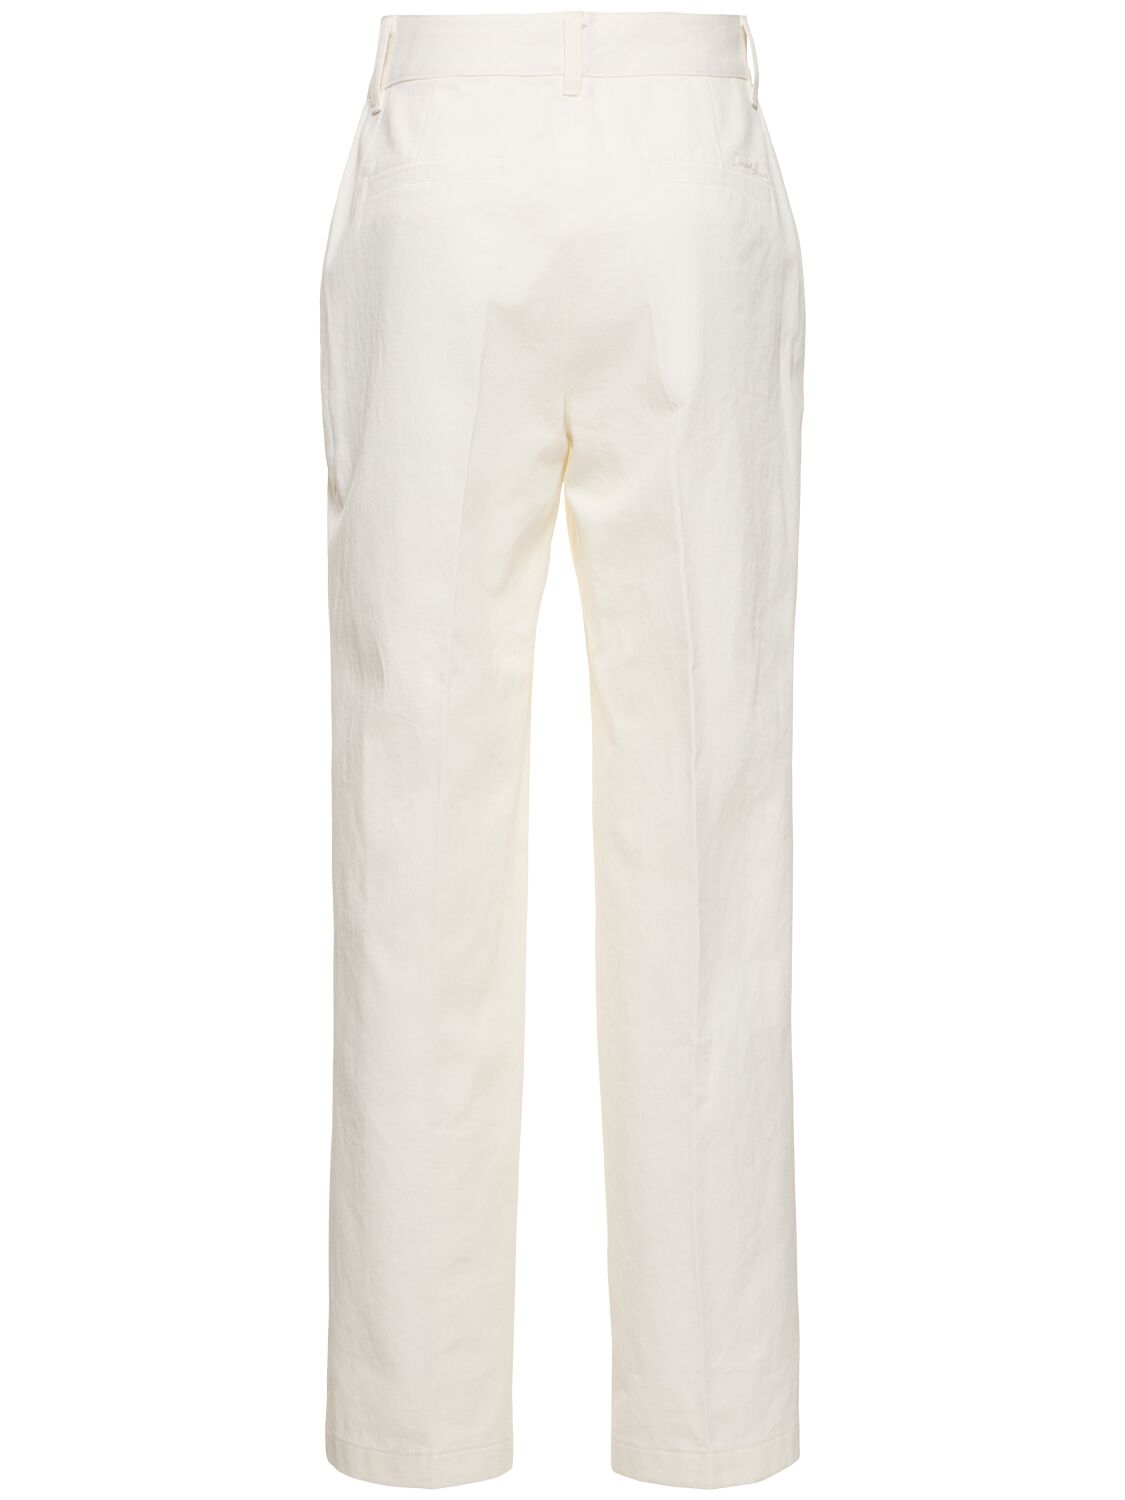 Shop Dunst Summer Chino Pants In White